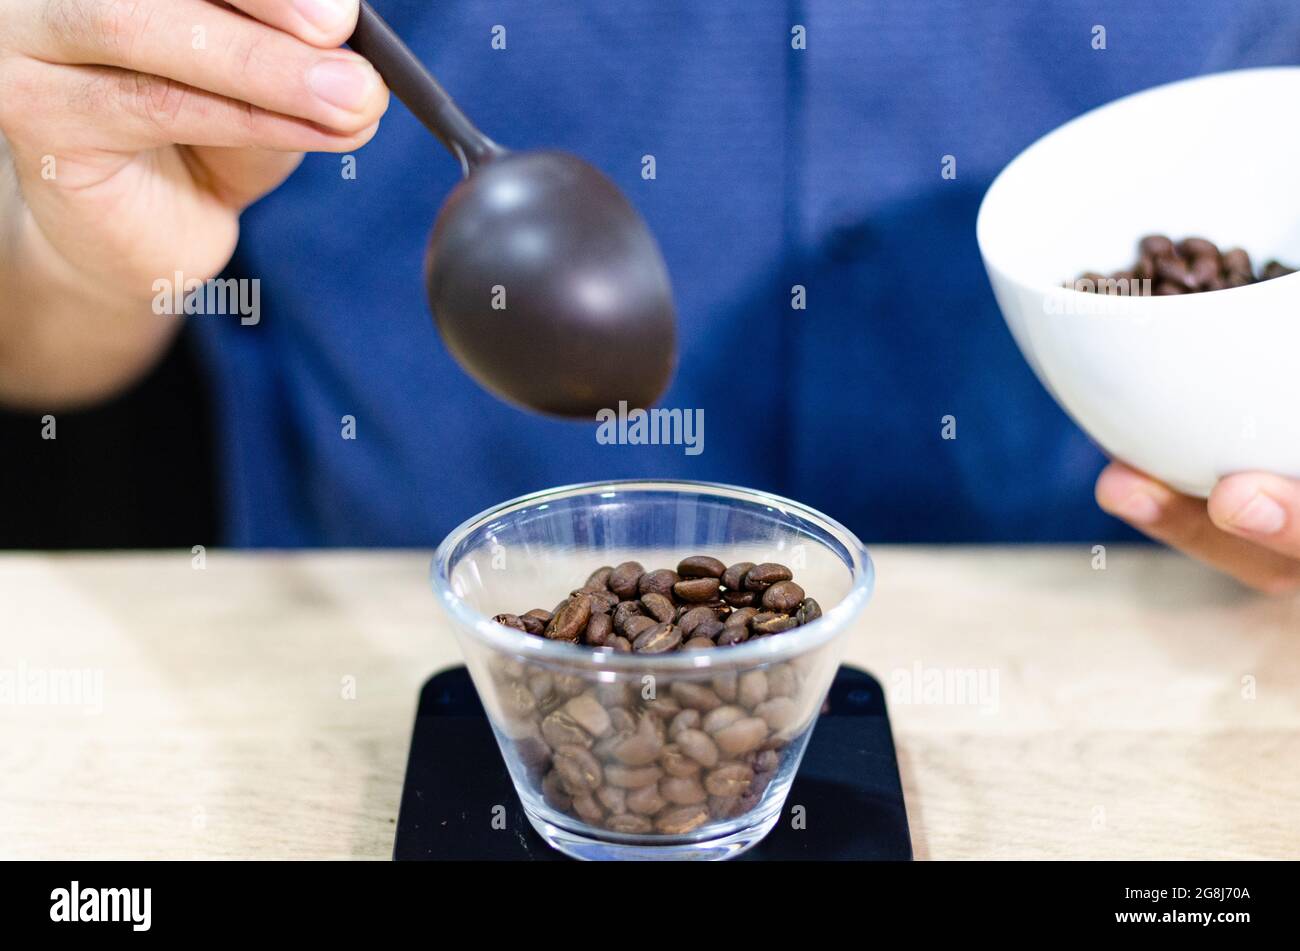 Weighing coffee grains on digital scale. Hands of male barista pouring roasted coffee grains on a scale before brewing coffee. Stock Photo